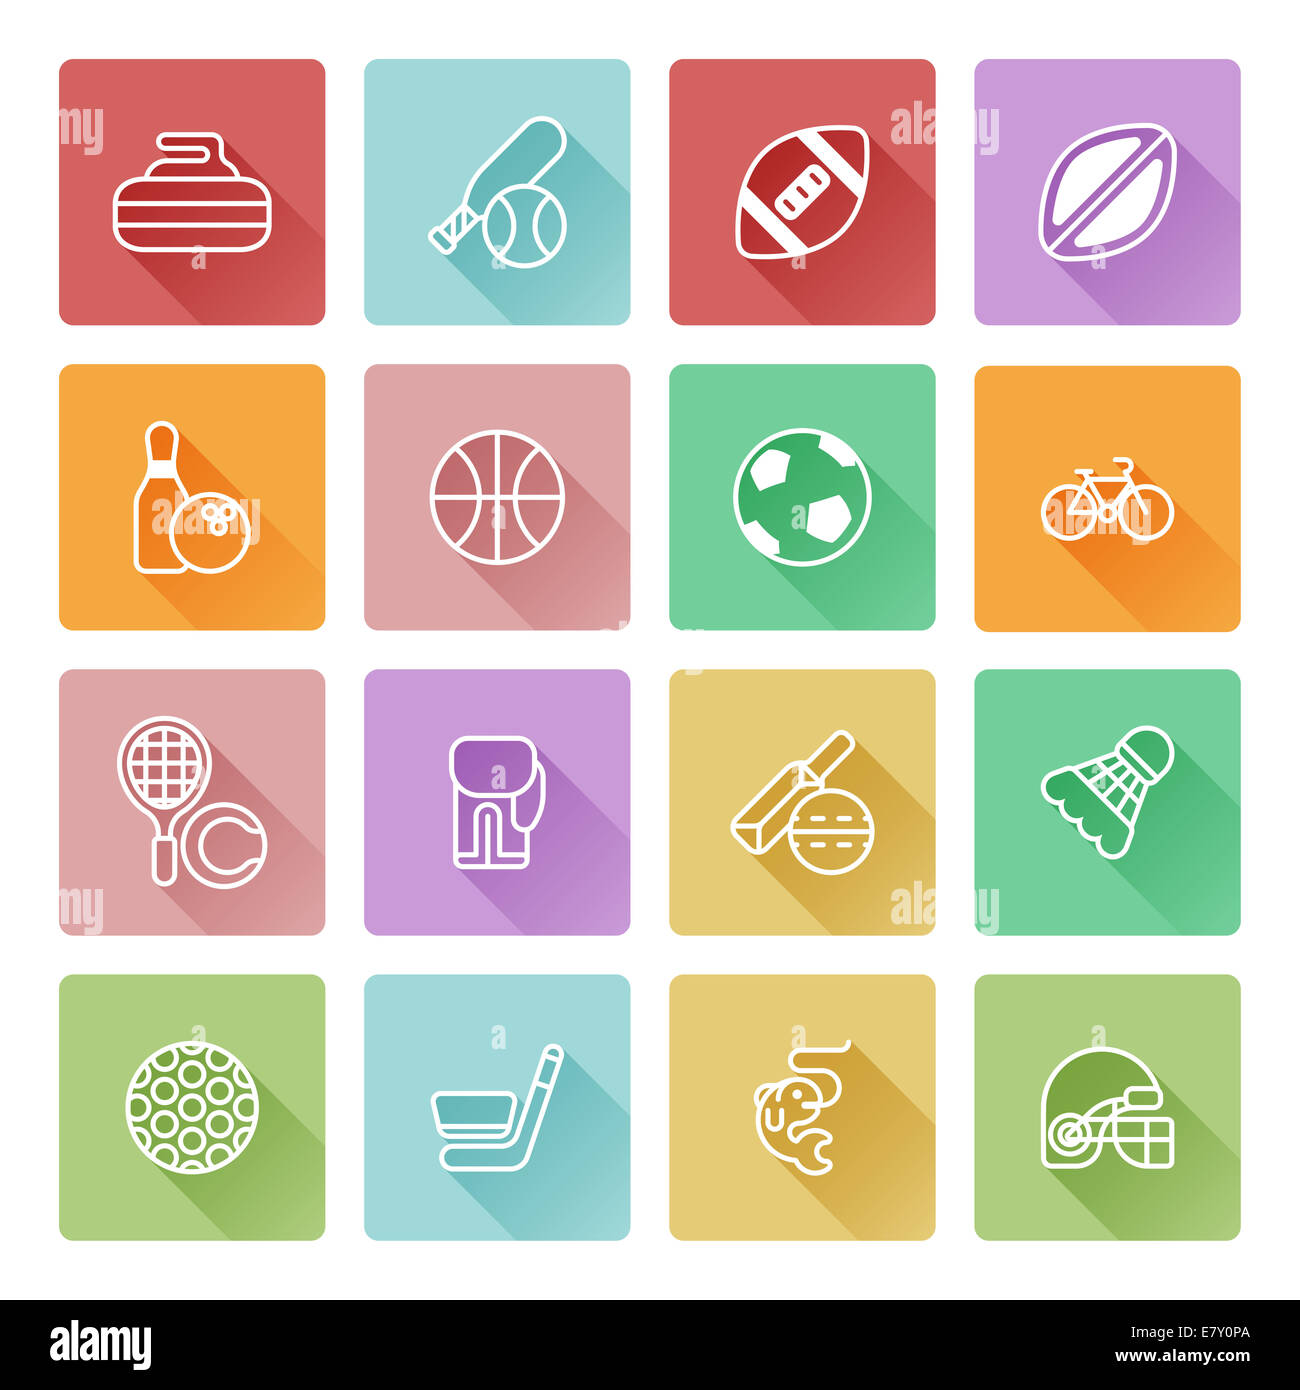 Sports icons set with icons for many sports including soccer, cricket, golf and many more Stock Photo